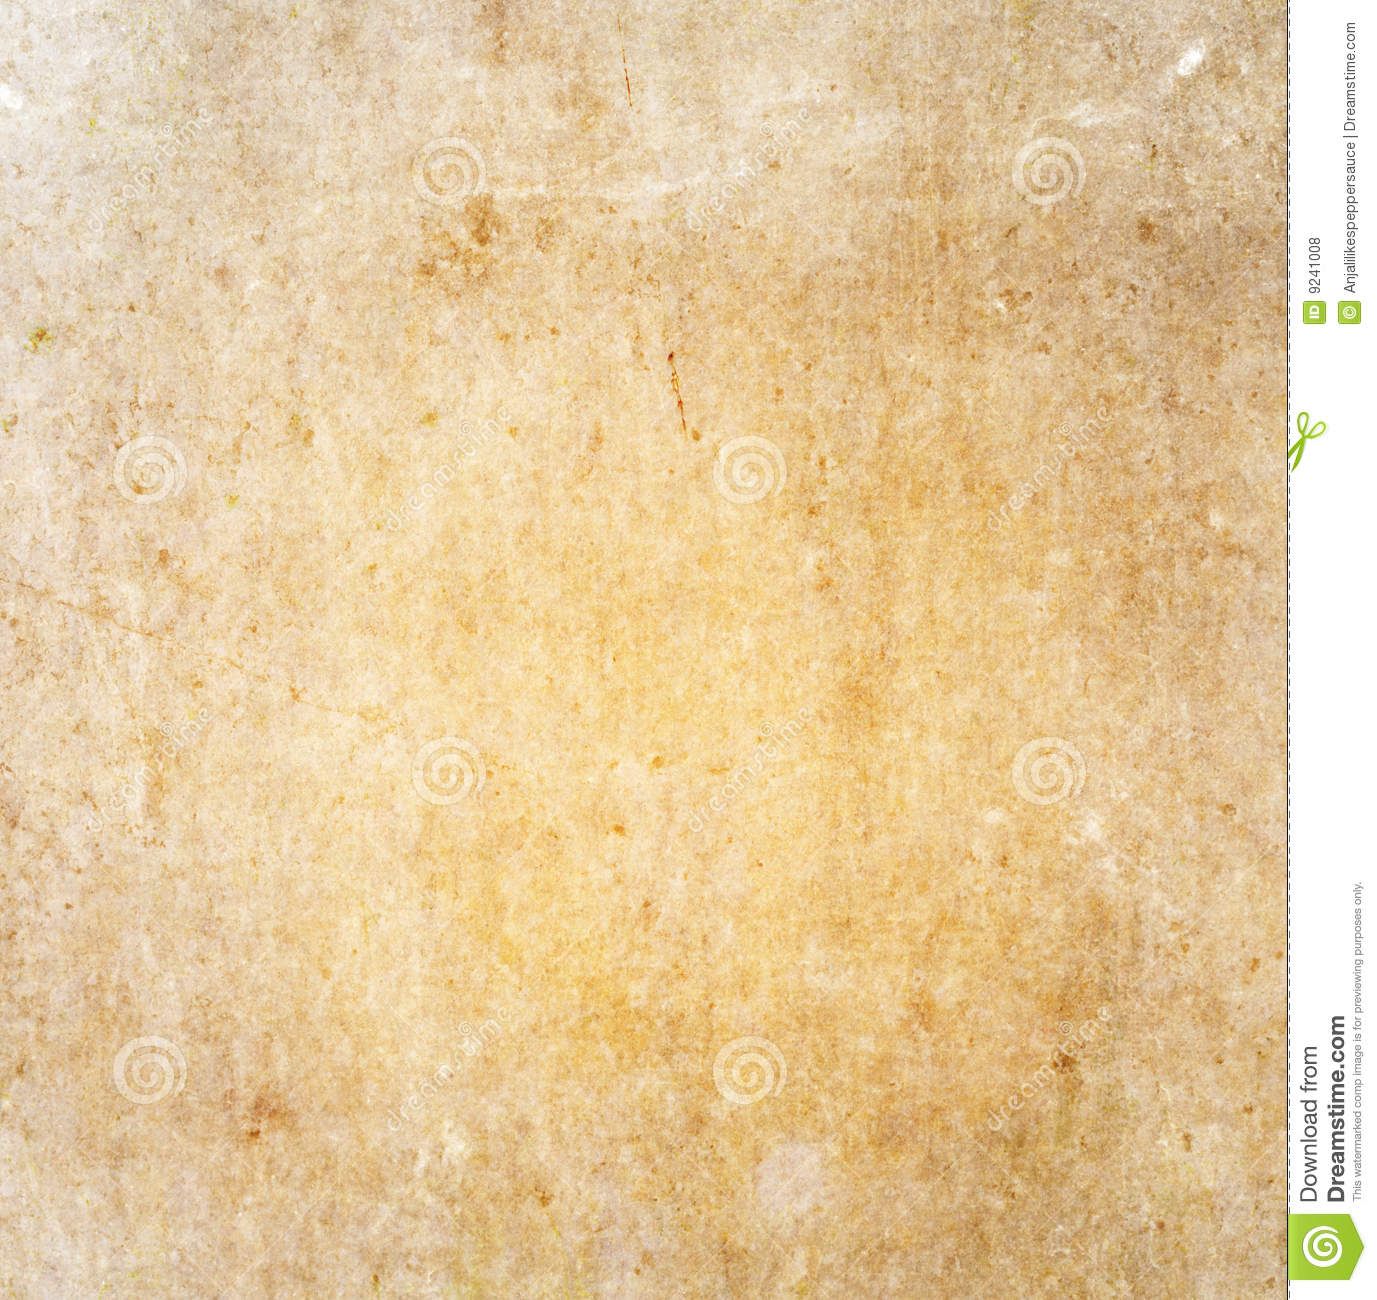 Background Image With Earthy Texture Royalty Stock Photos